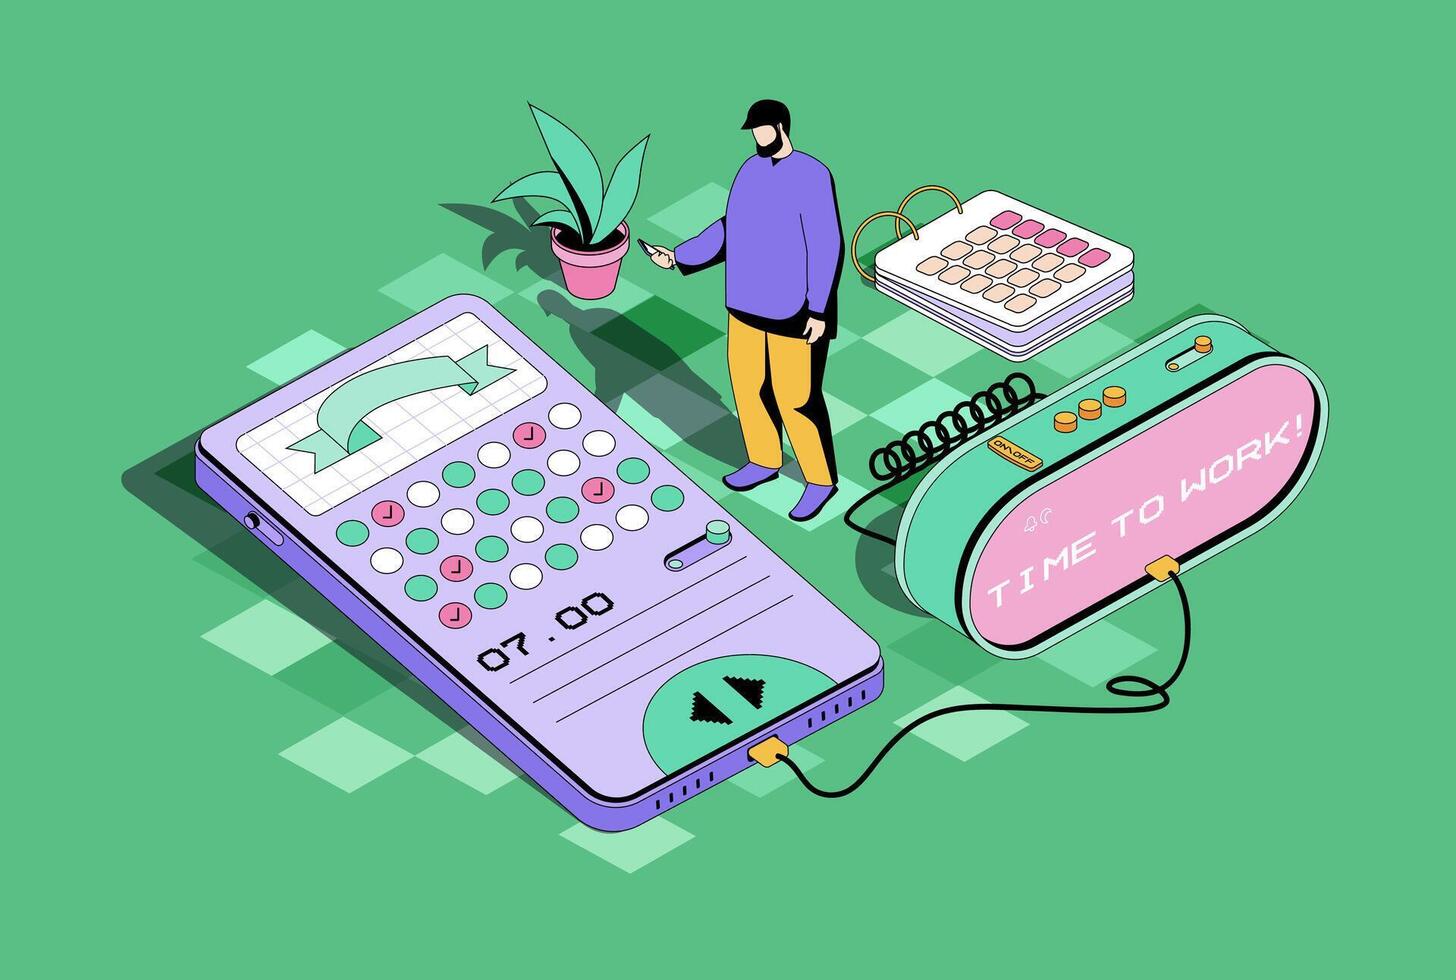 Mobile organizer concept in 3d isometric design. Man manage work tasks, marks meetings on online calendar and organized time using app. Vector isometry illustration with people scene for web graphic